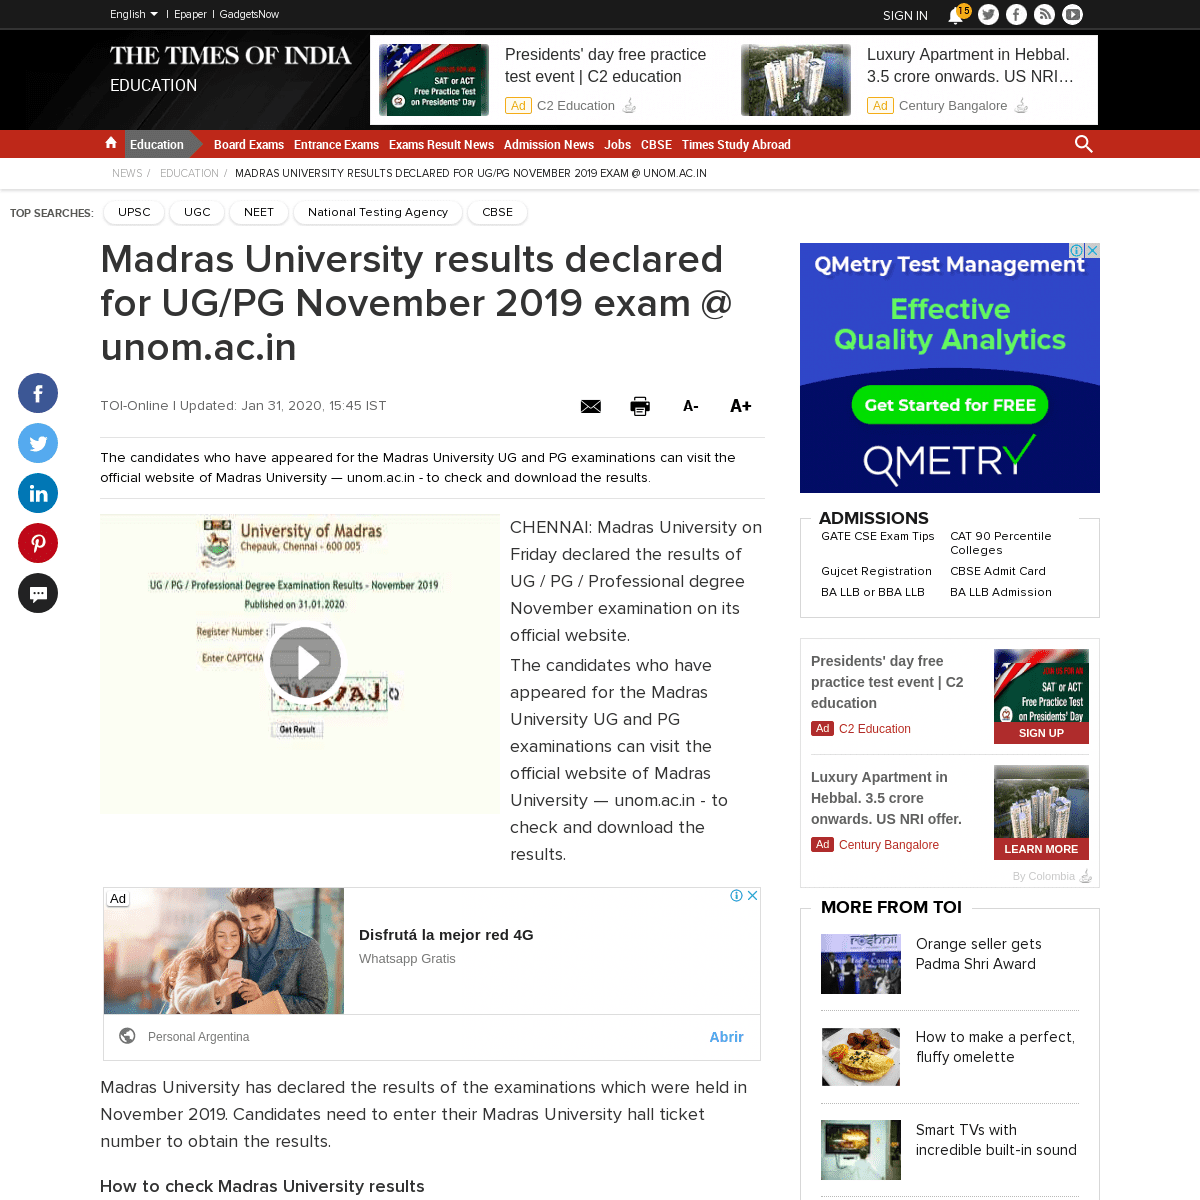 A complete backup of timesofindia.indiatimes.com/home/education/news/madras-university-results-announced-for-ug/pg-november-2019